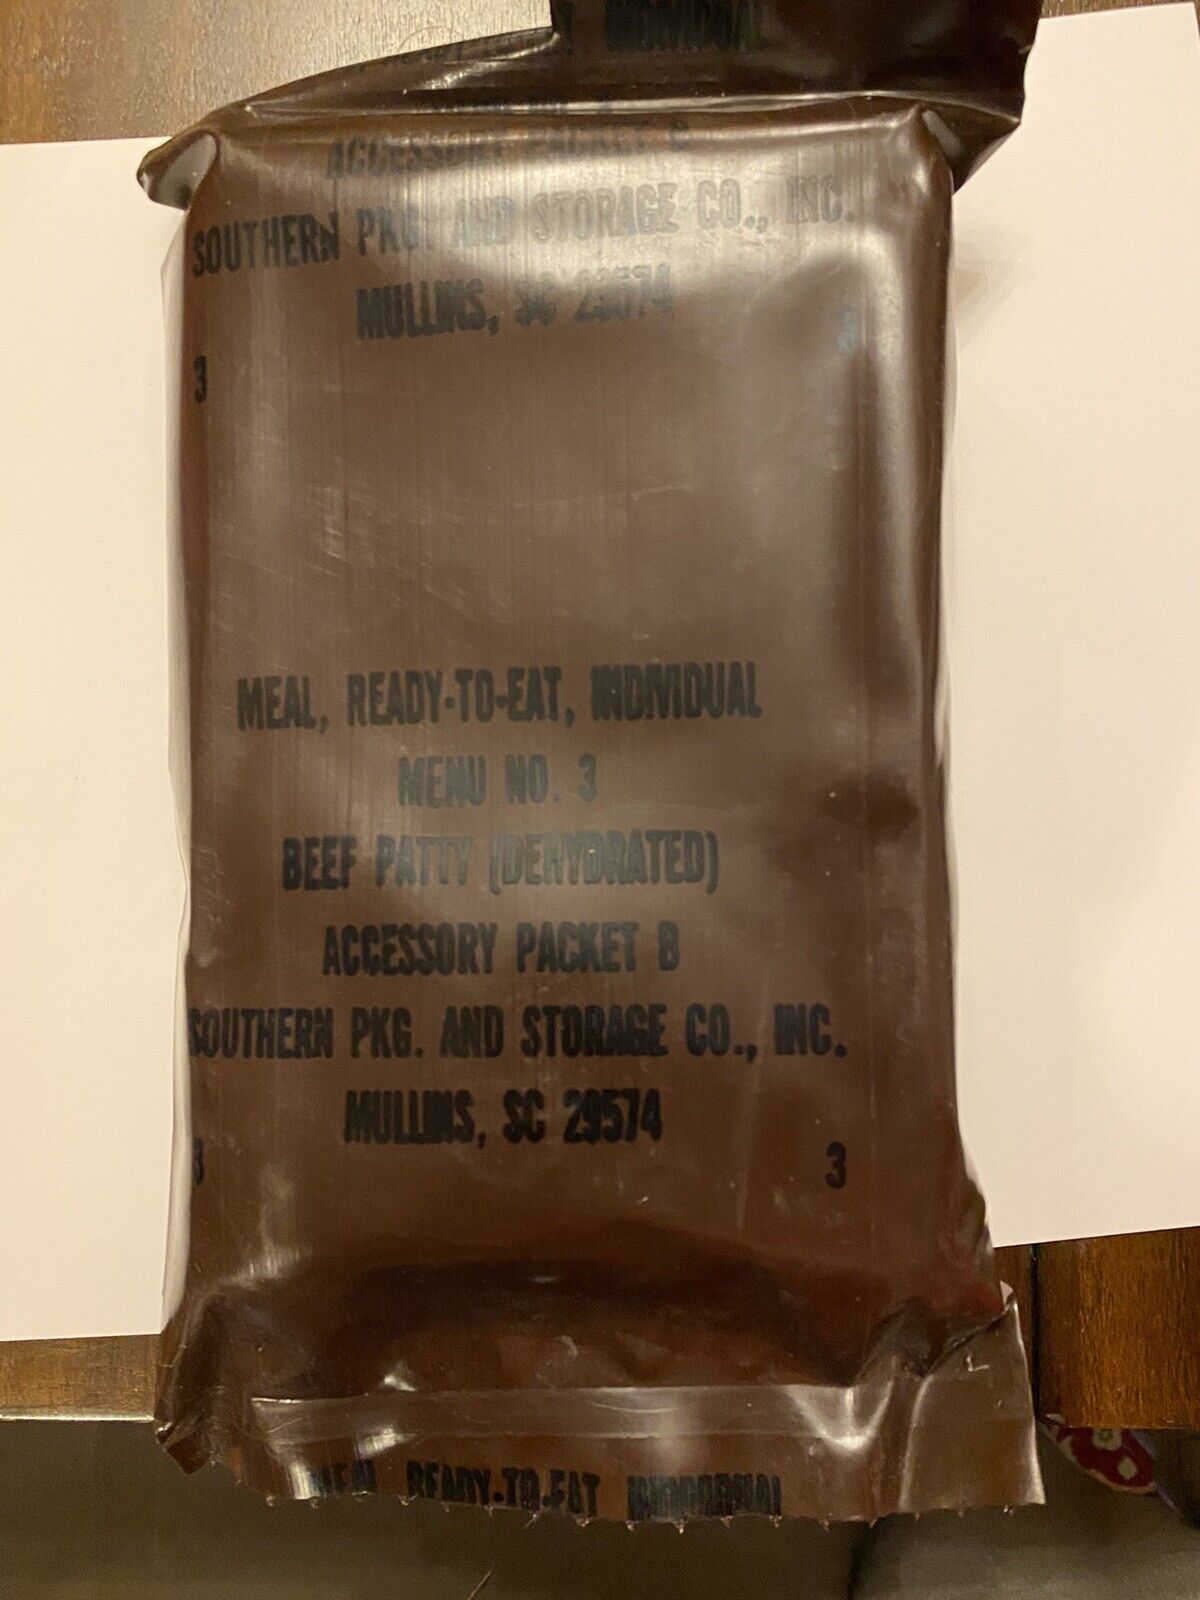 Vintage 1985 MRE Meal Ready To Eat BEEF PATTY Dehydrated Menu No 3 Accessory B